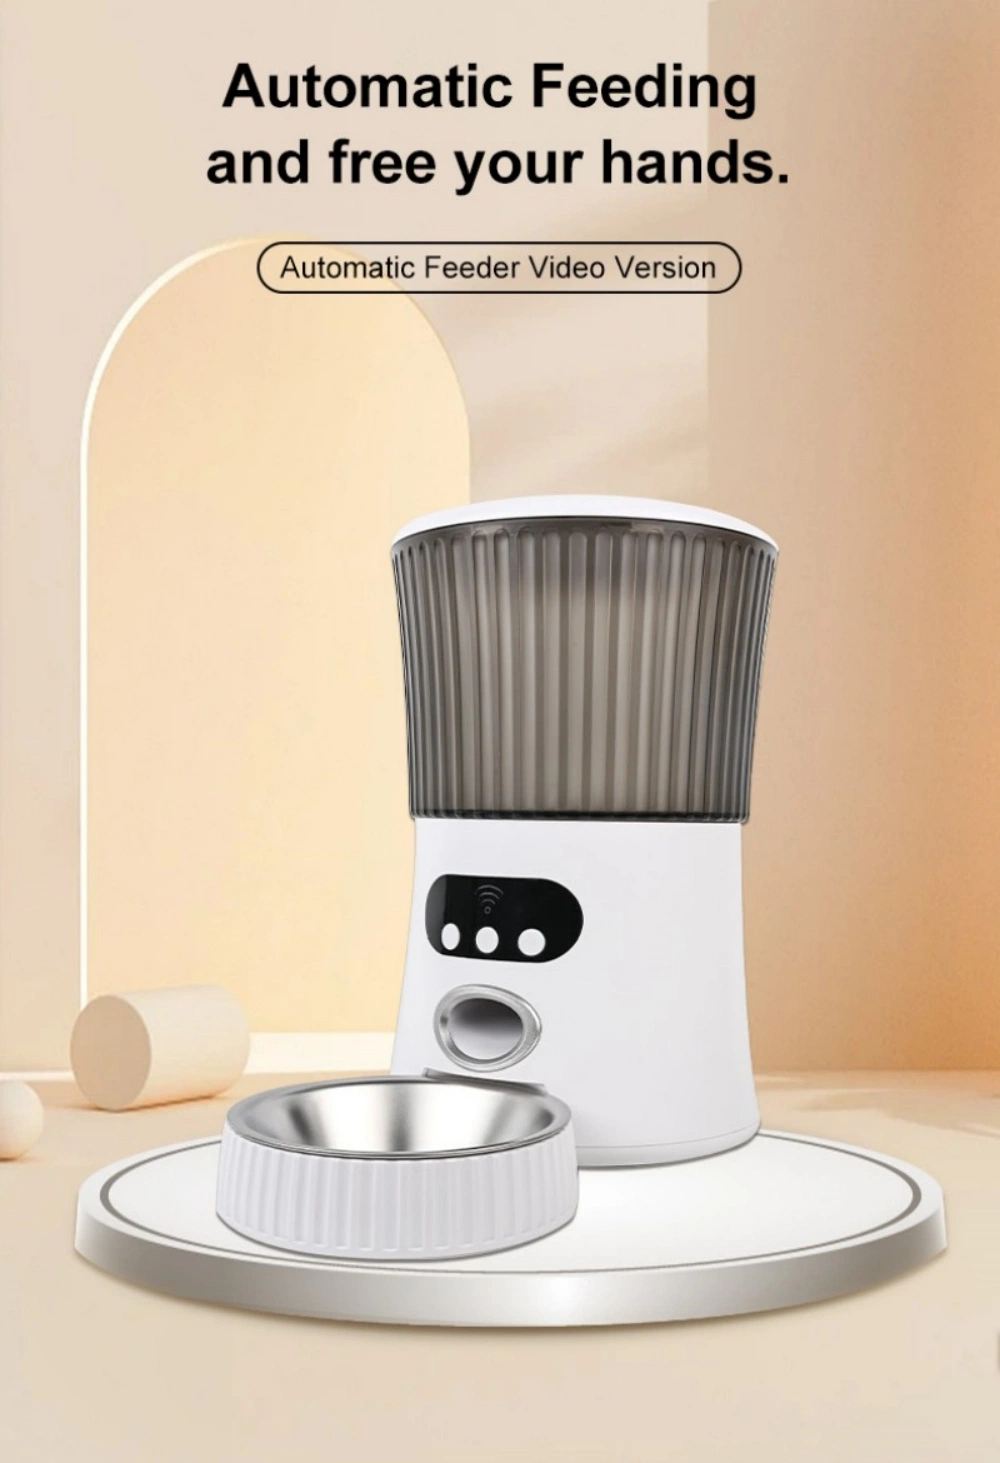 Dog Cat Feeder with Stainless Steel Bowl 5L Intelligent Pet Feeder